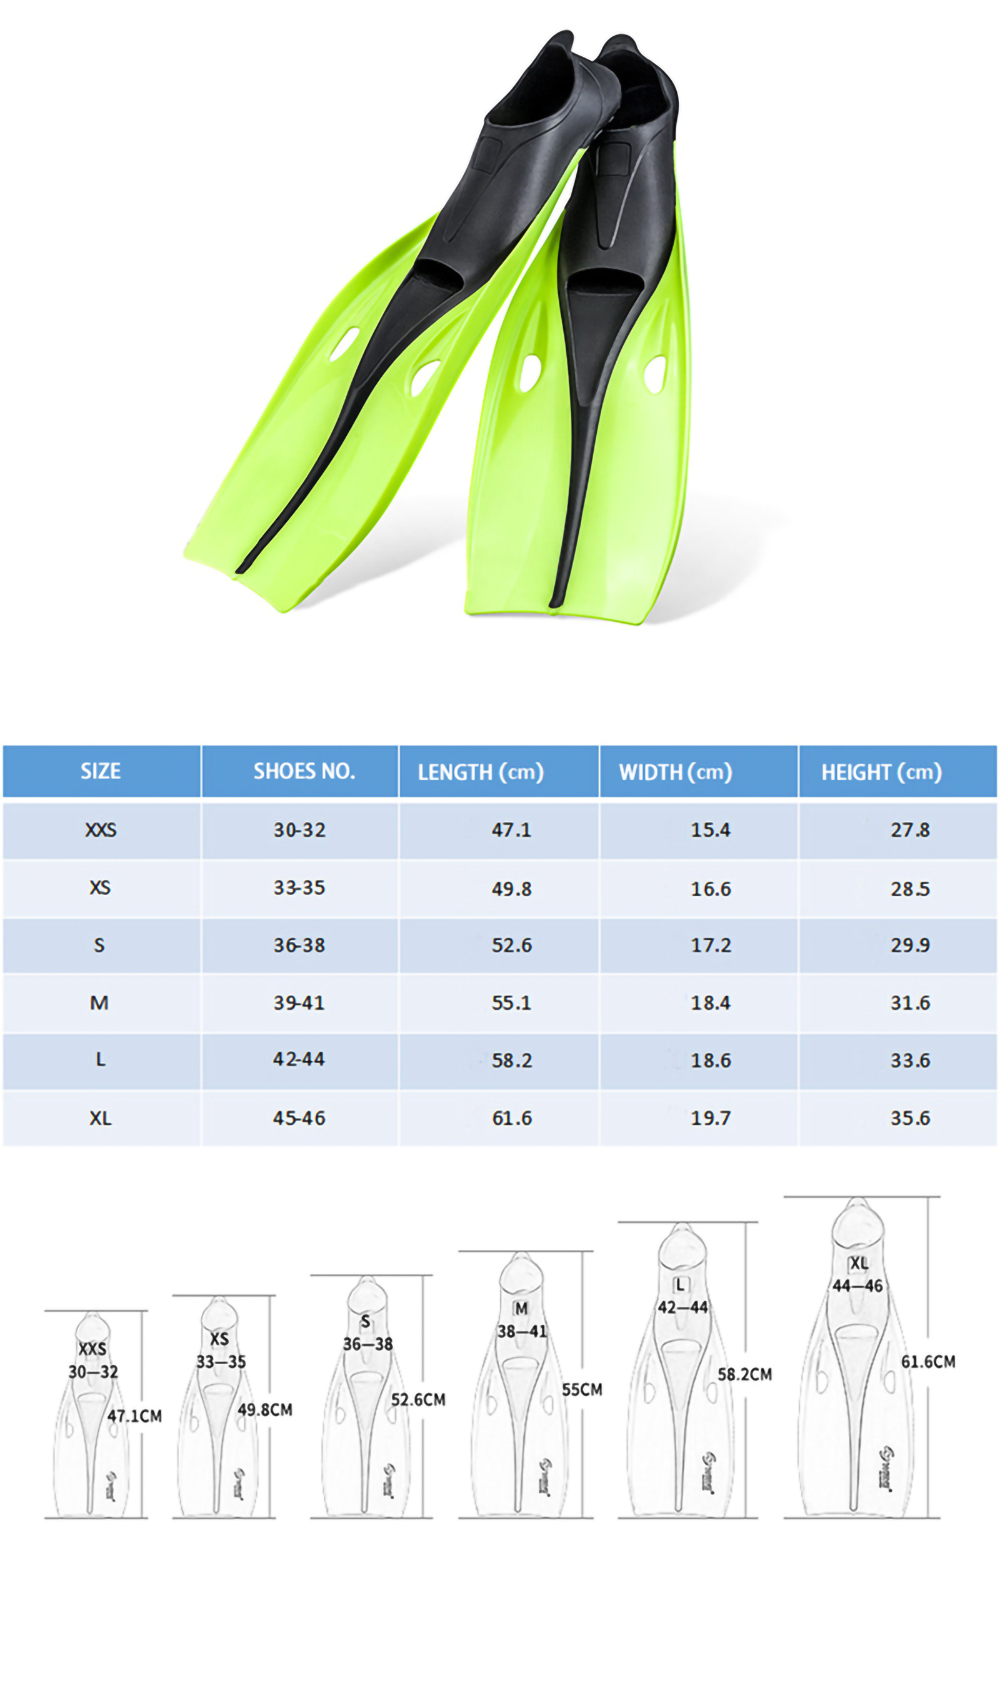 Non-slip Sole Softer Self-adaptive Long Blade Snorkeling Spearfishing Freediving Scuba Diving Fins Flippers